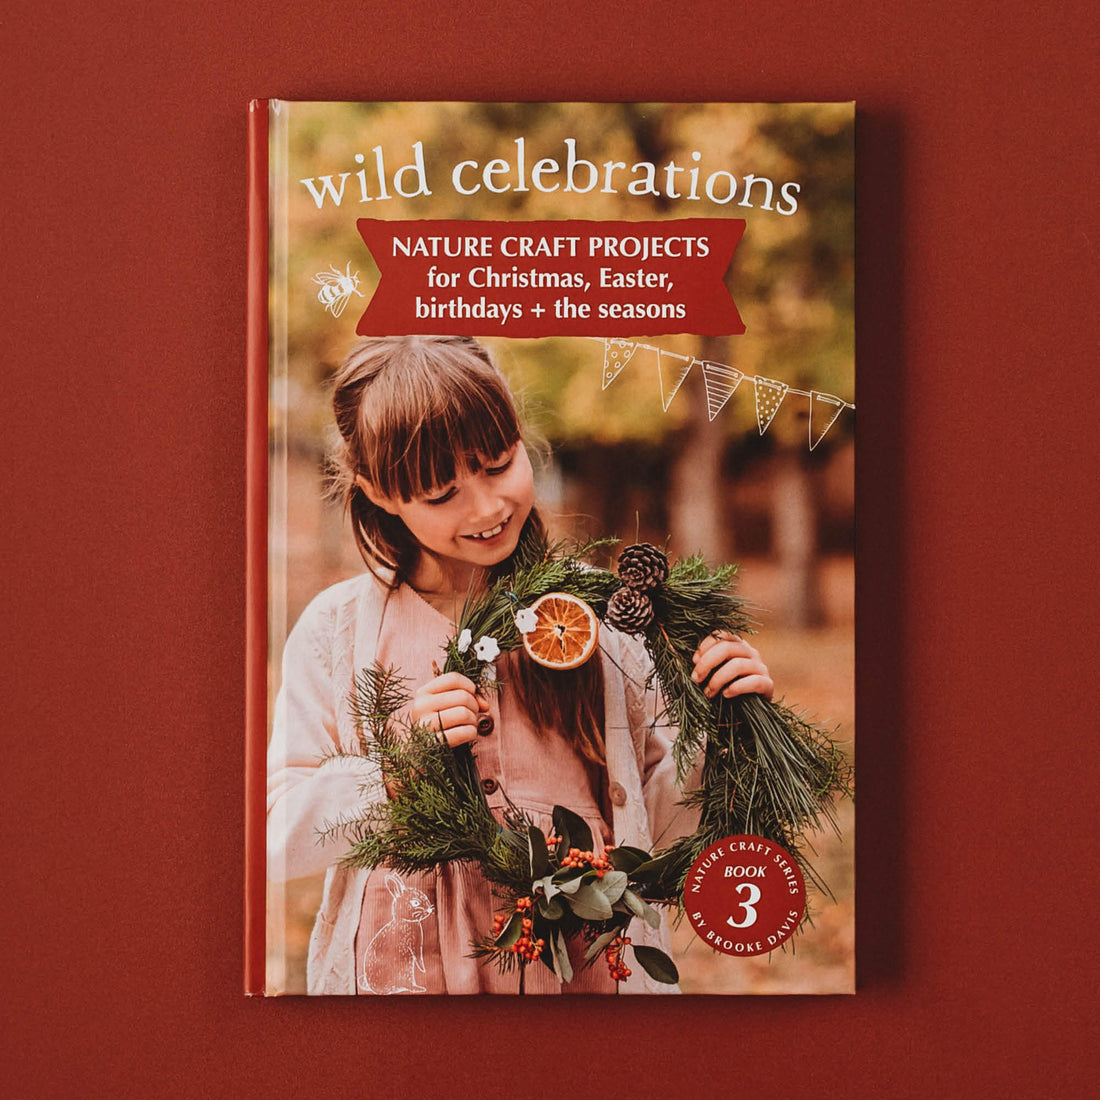 Wild Celebrations book, with nature craft for Christmas, Easter, the Season and birthday parties. Made in Australia by Your Wild Books.